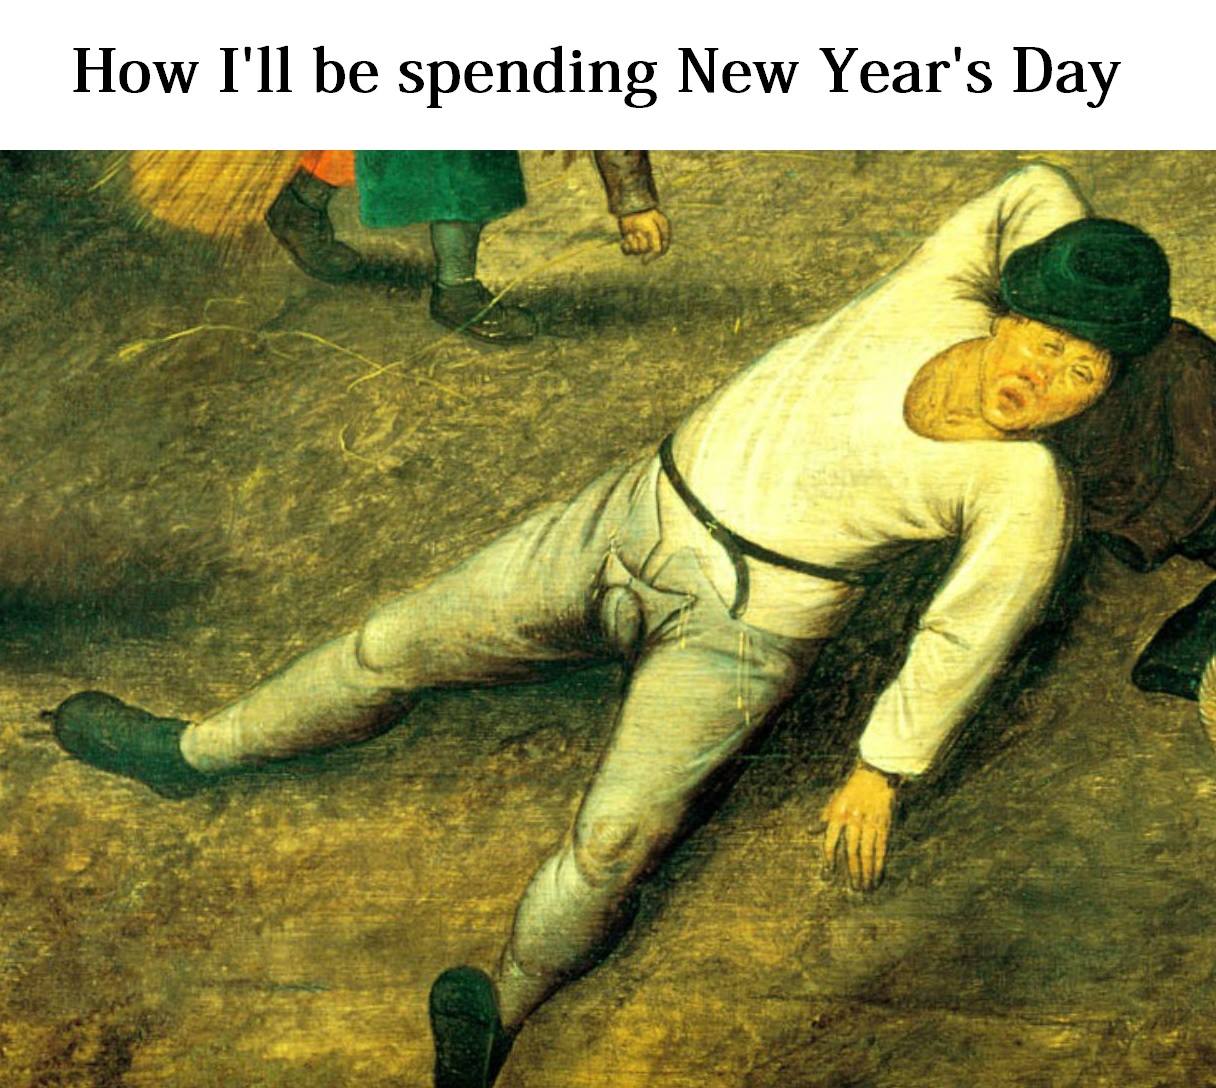 medieval time peasants - How I'll be spending New Year's Day